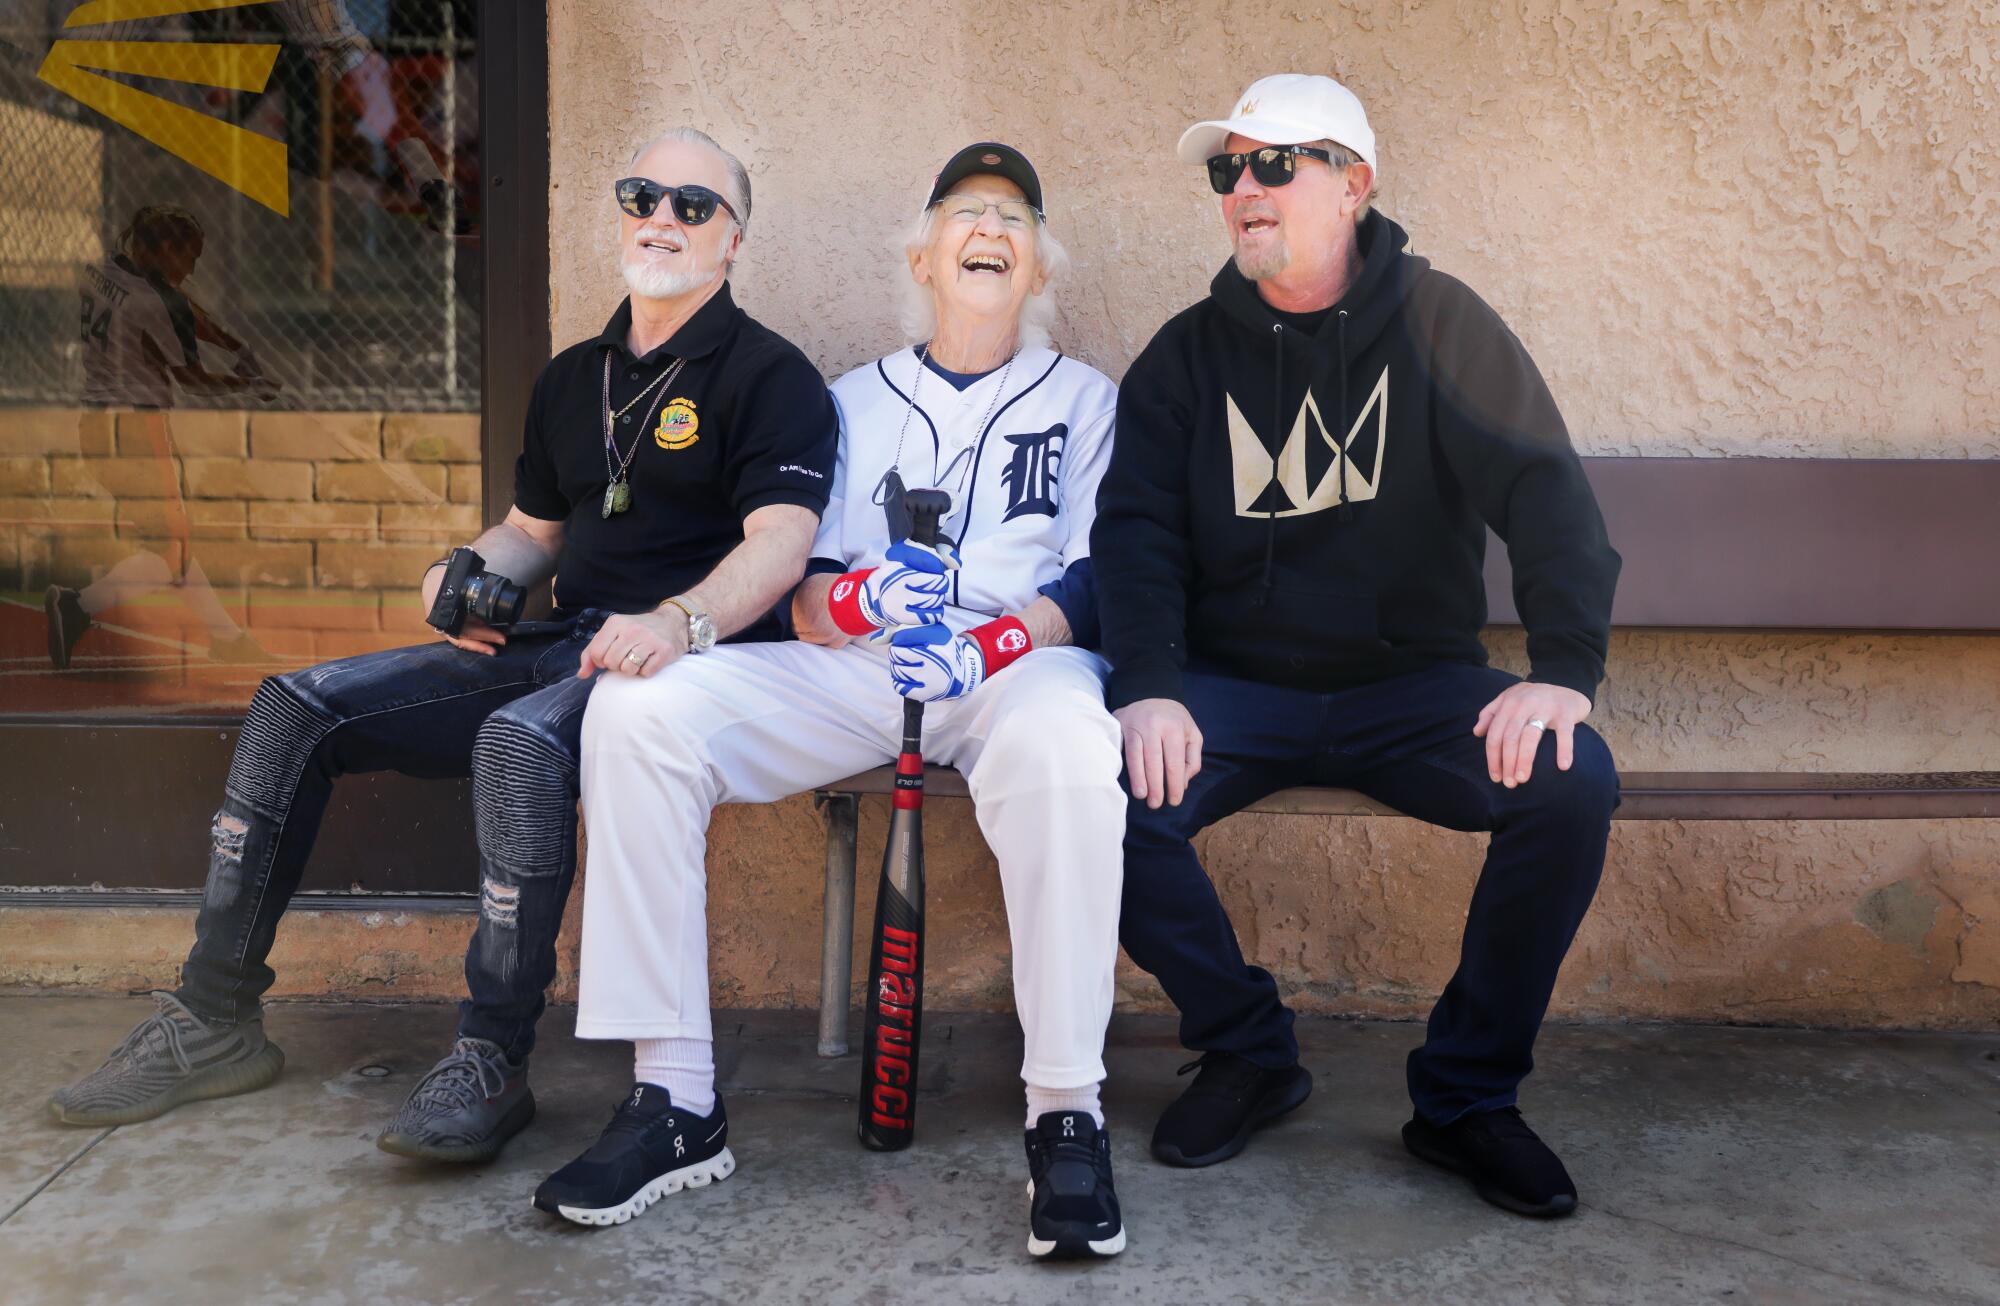 Three men take a break between hitting balls at the batting cages in Anaheim.